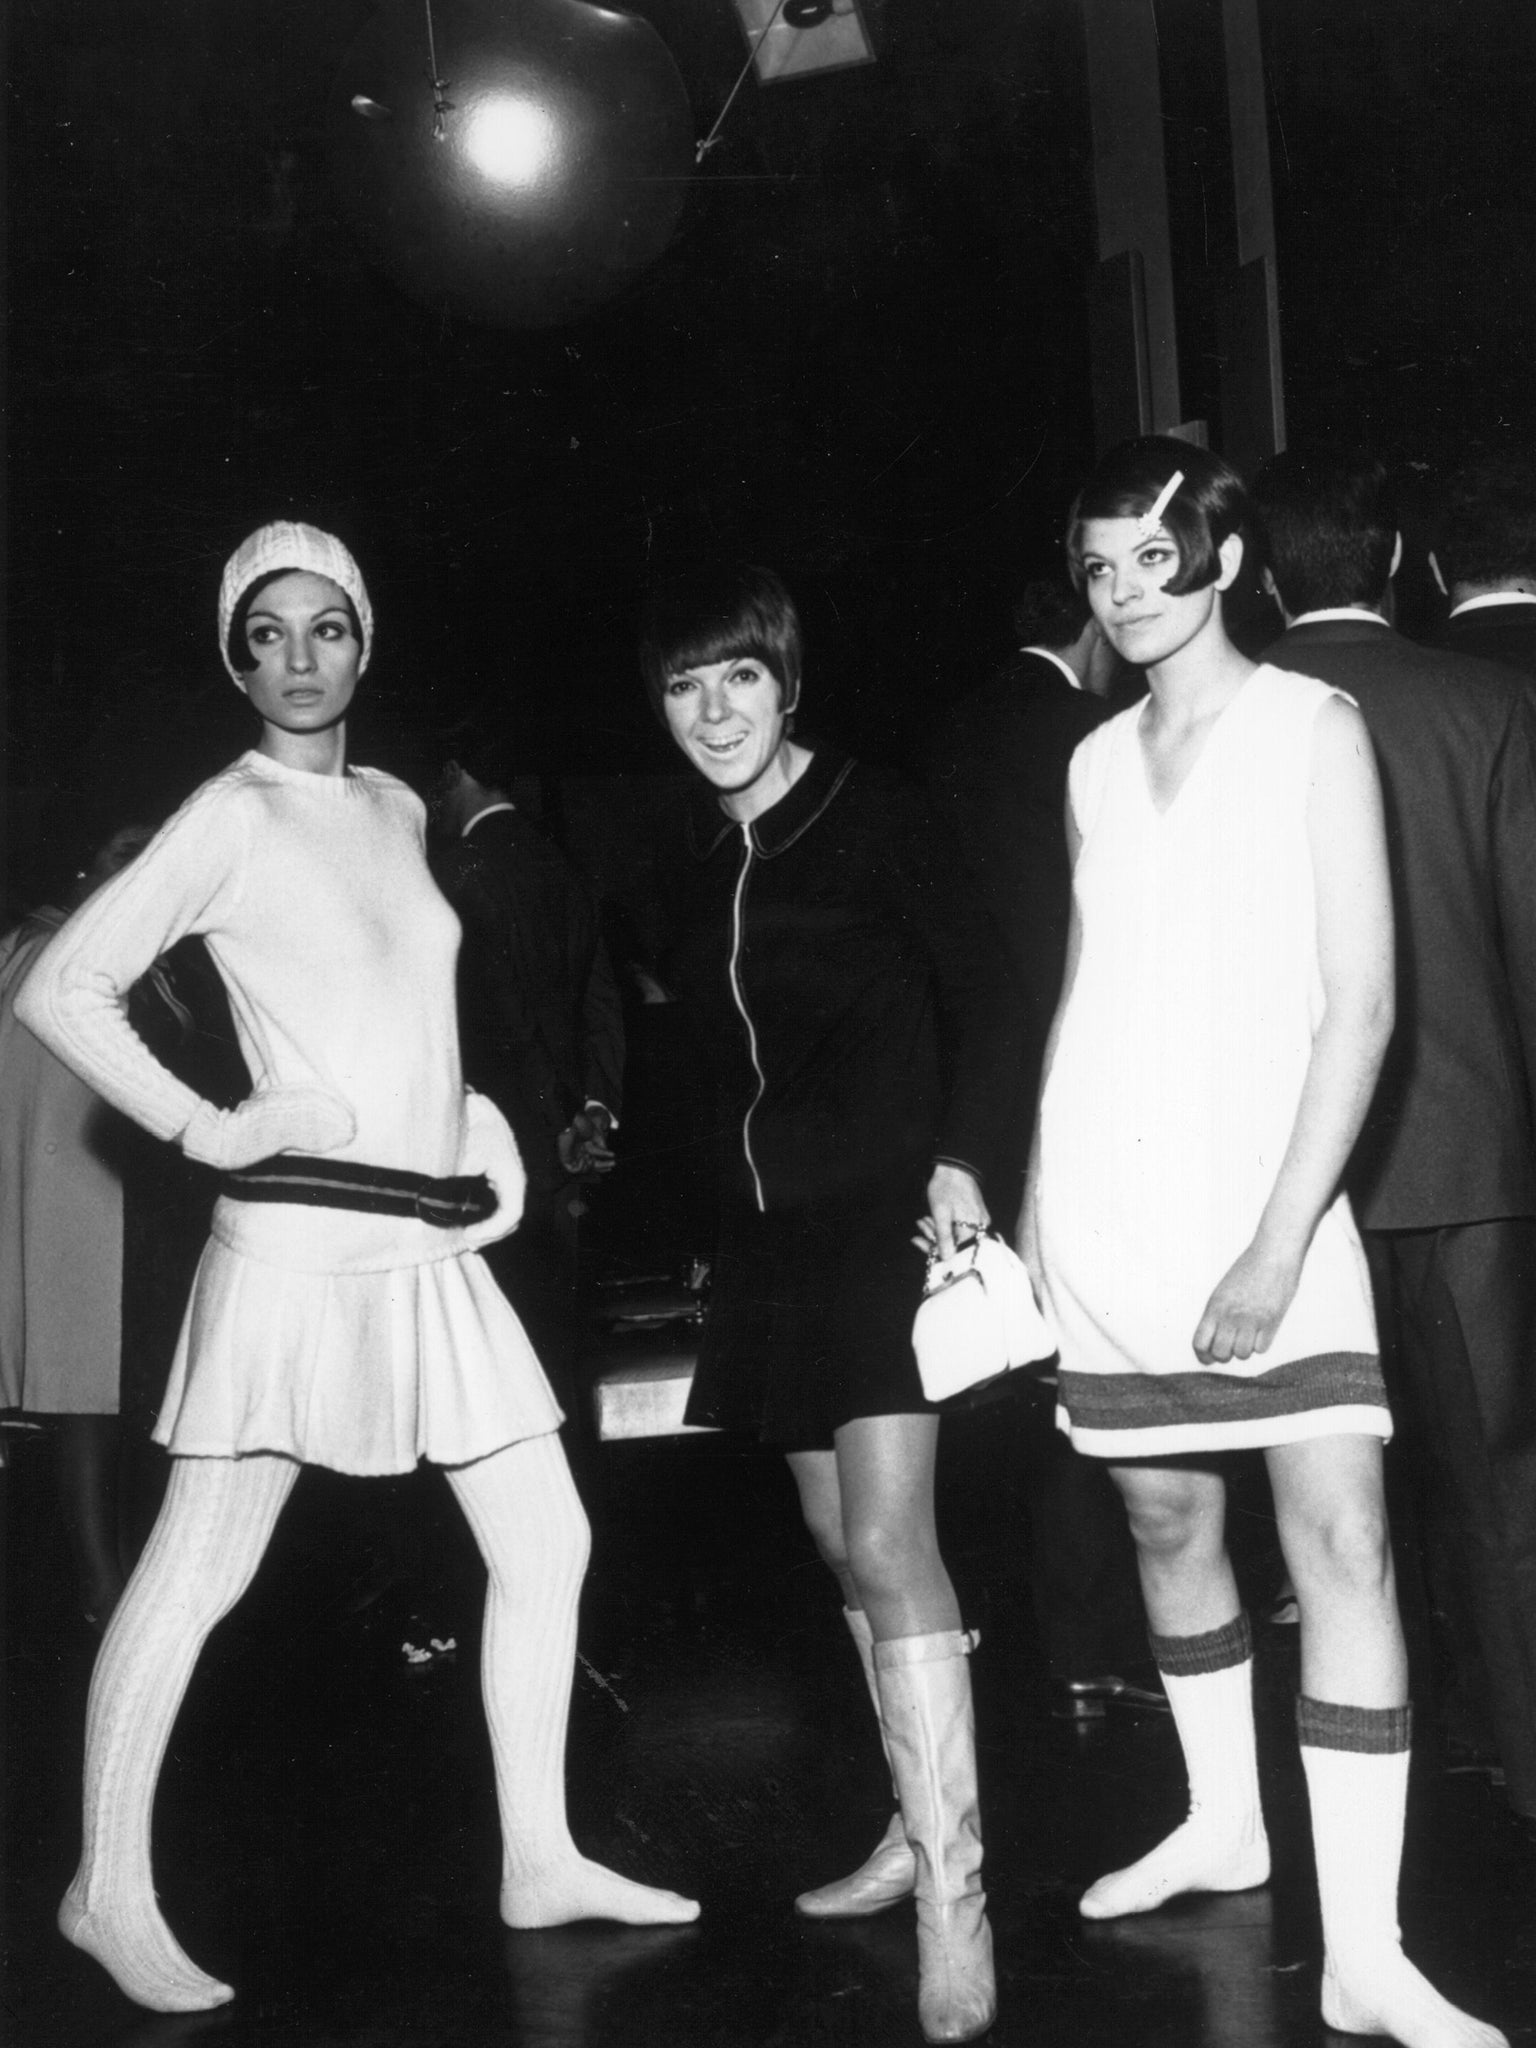 Models wearing pieces from Quant’s 1967 ‘Viva Viva’ collection